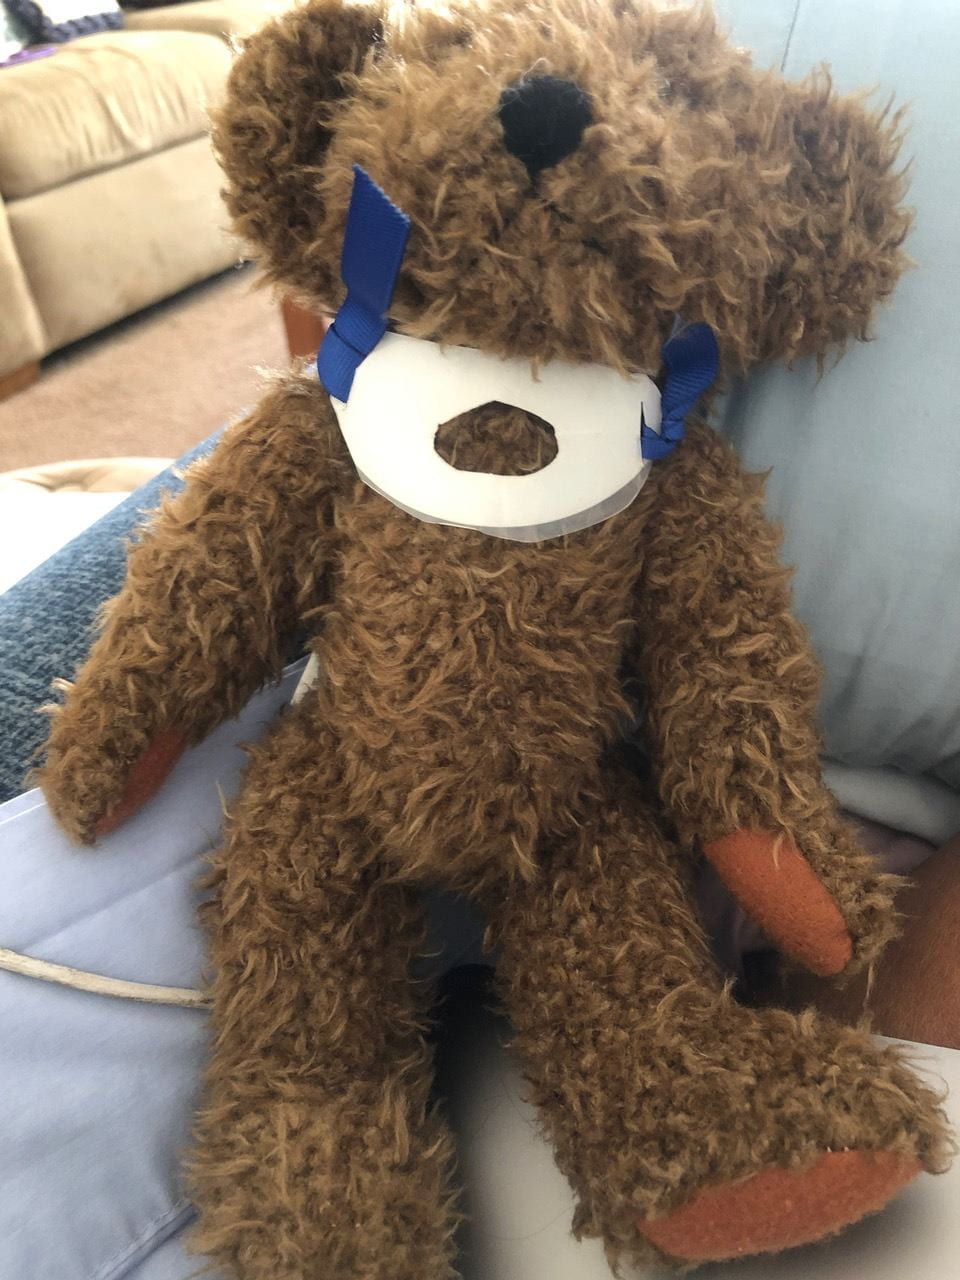 Teddy bear that is used to demonstrate tracheostomy care.